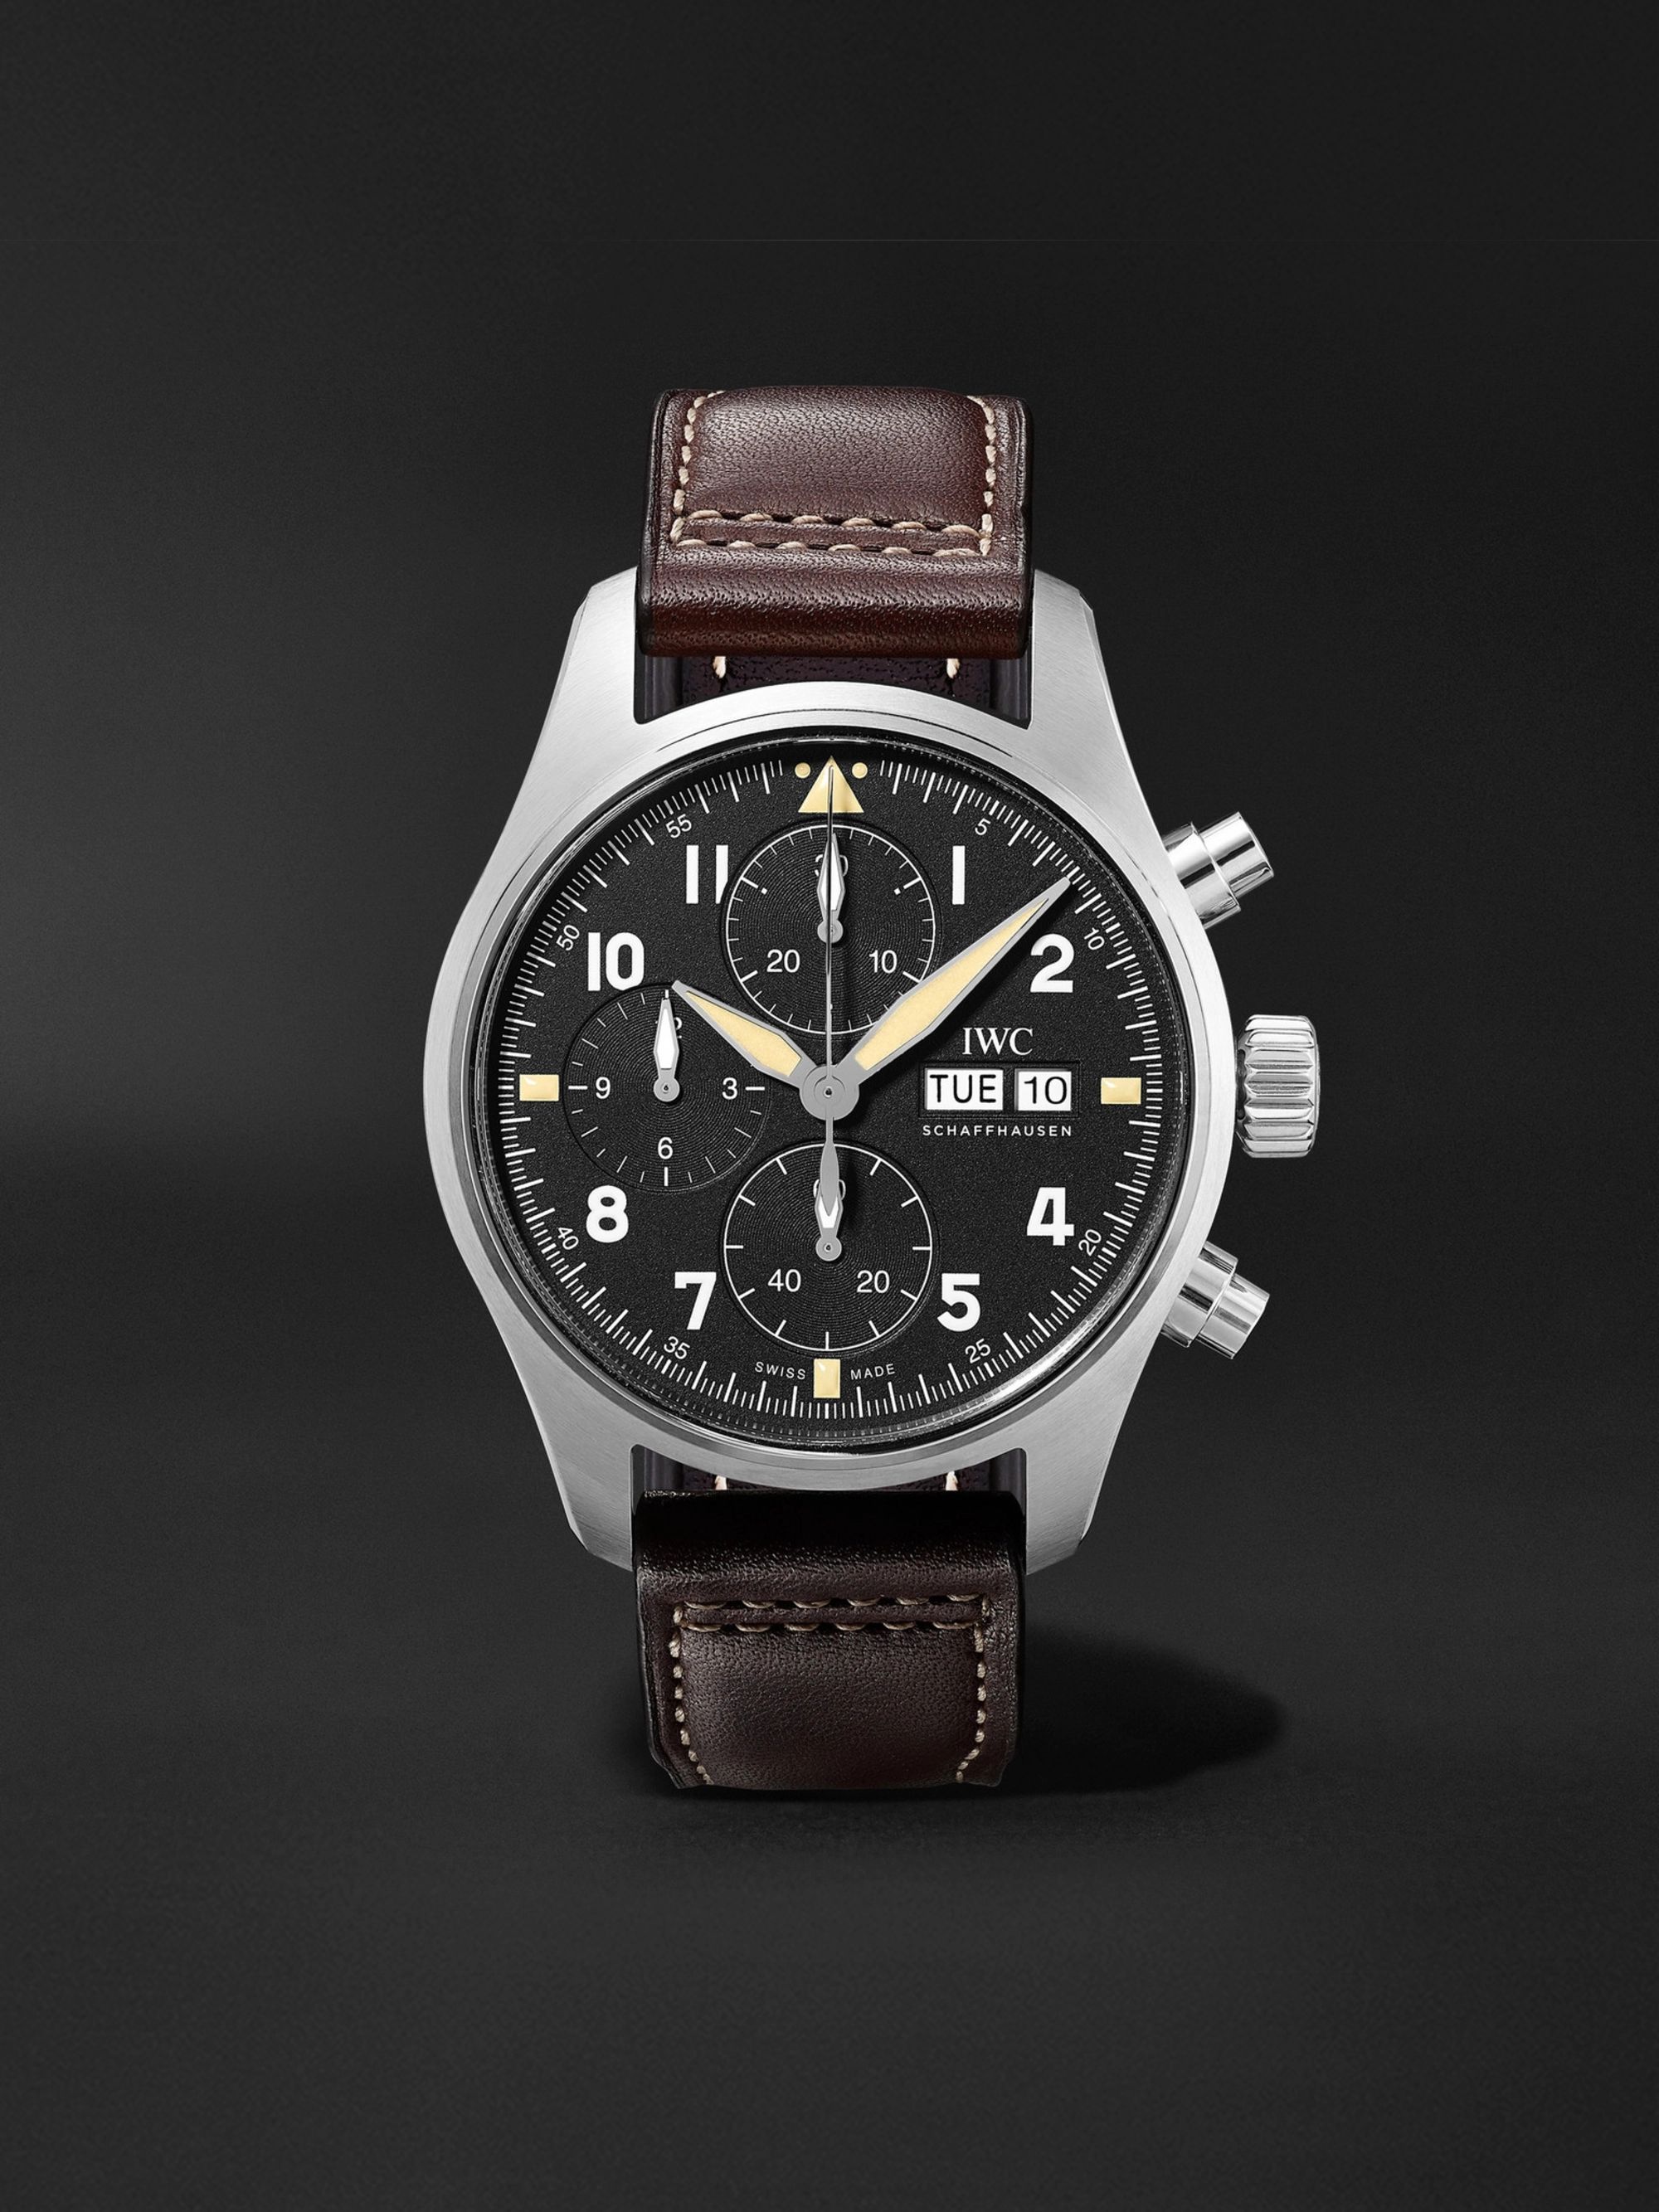 IWC SCHAFFHAUSEN Pilot's Spitfire Automatic Chronograph 41mm Stainless Steel and Leather Watch, Ref. No. IW387903